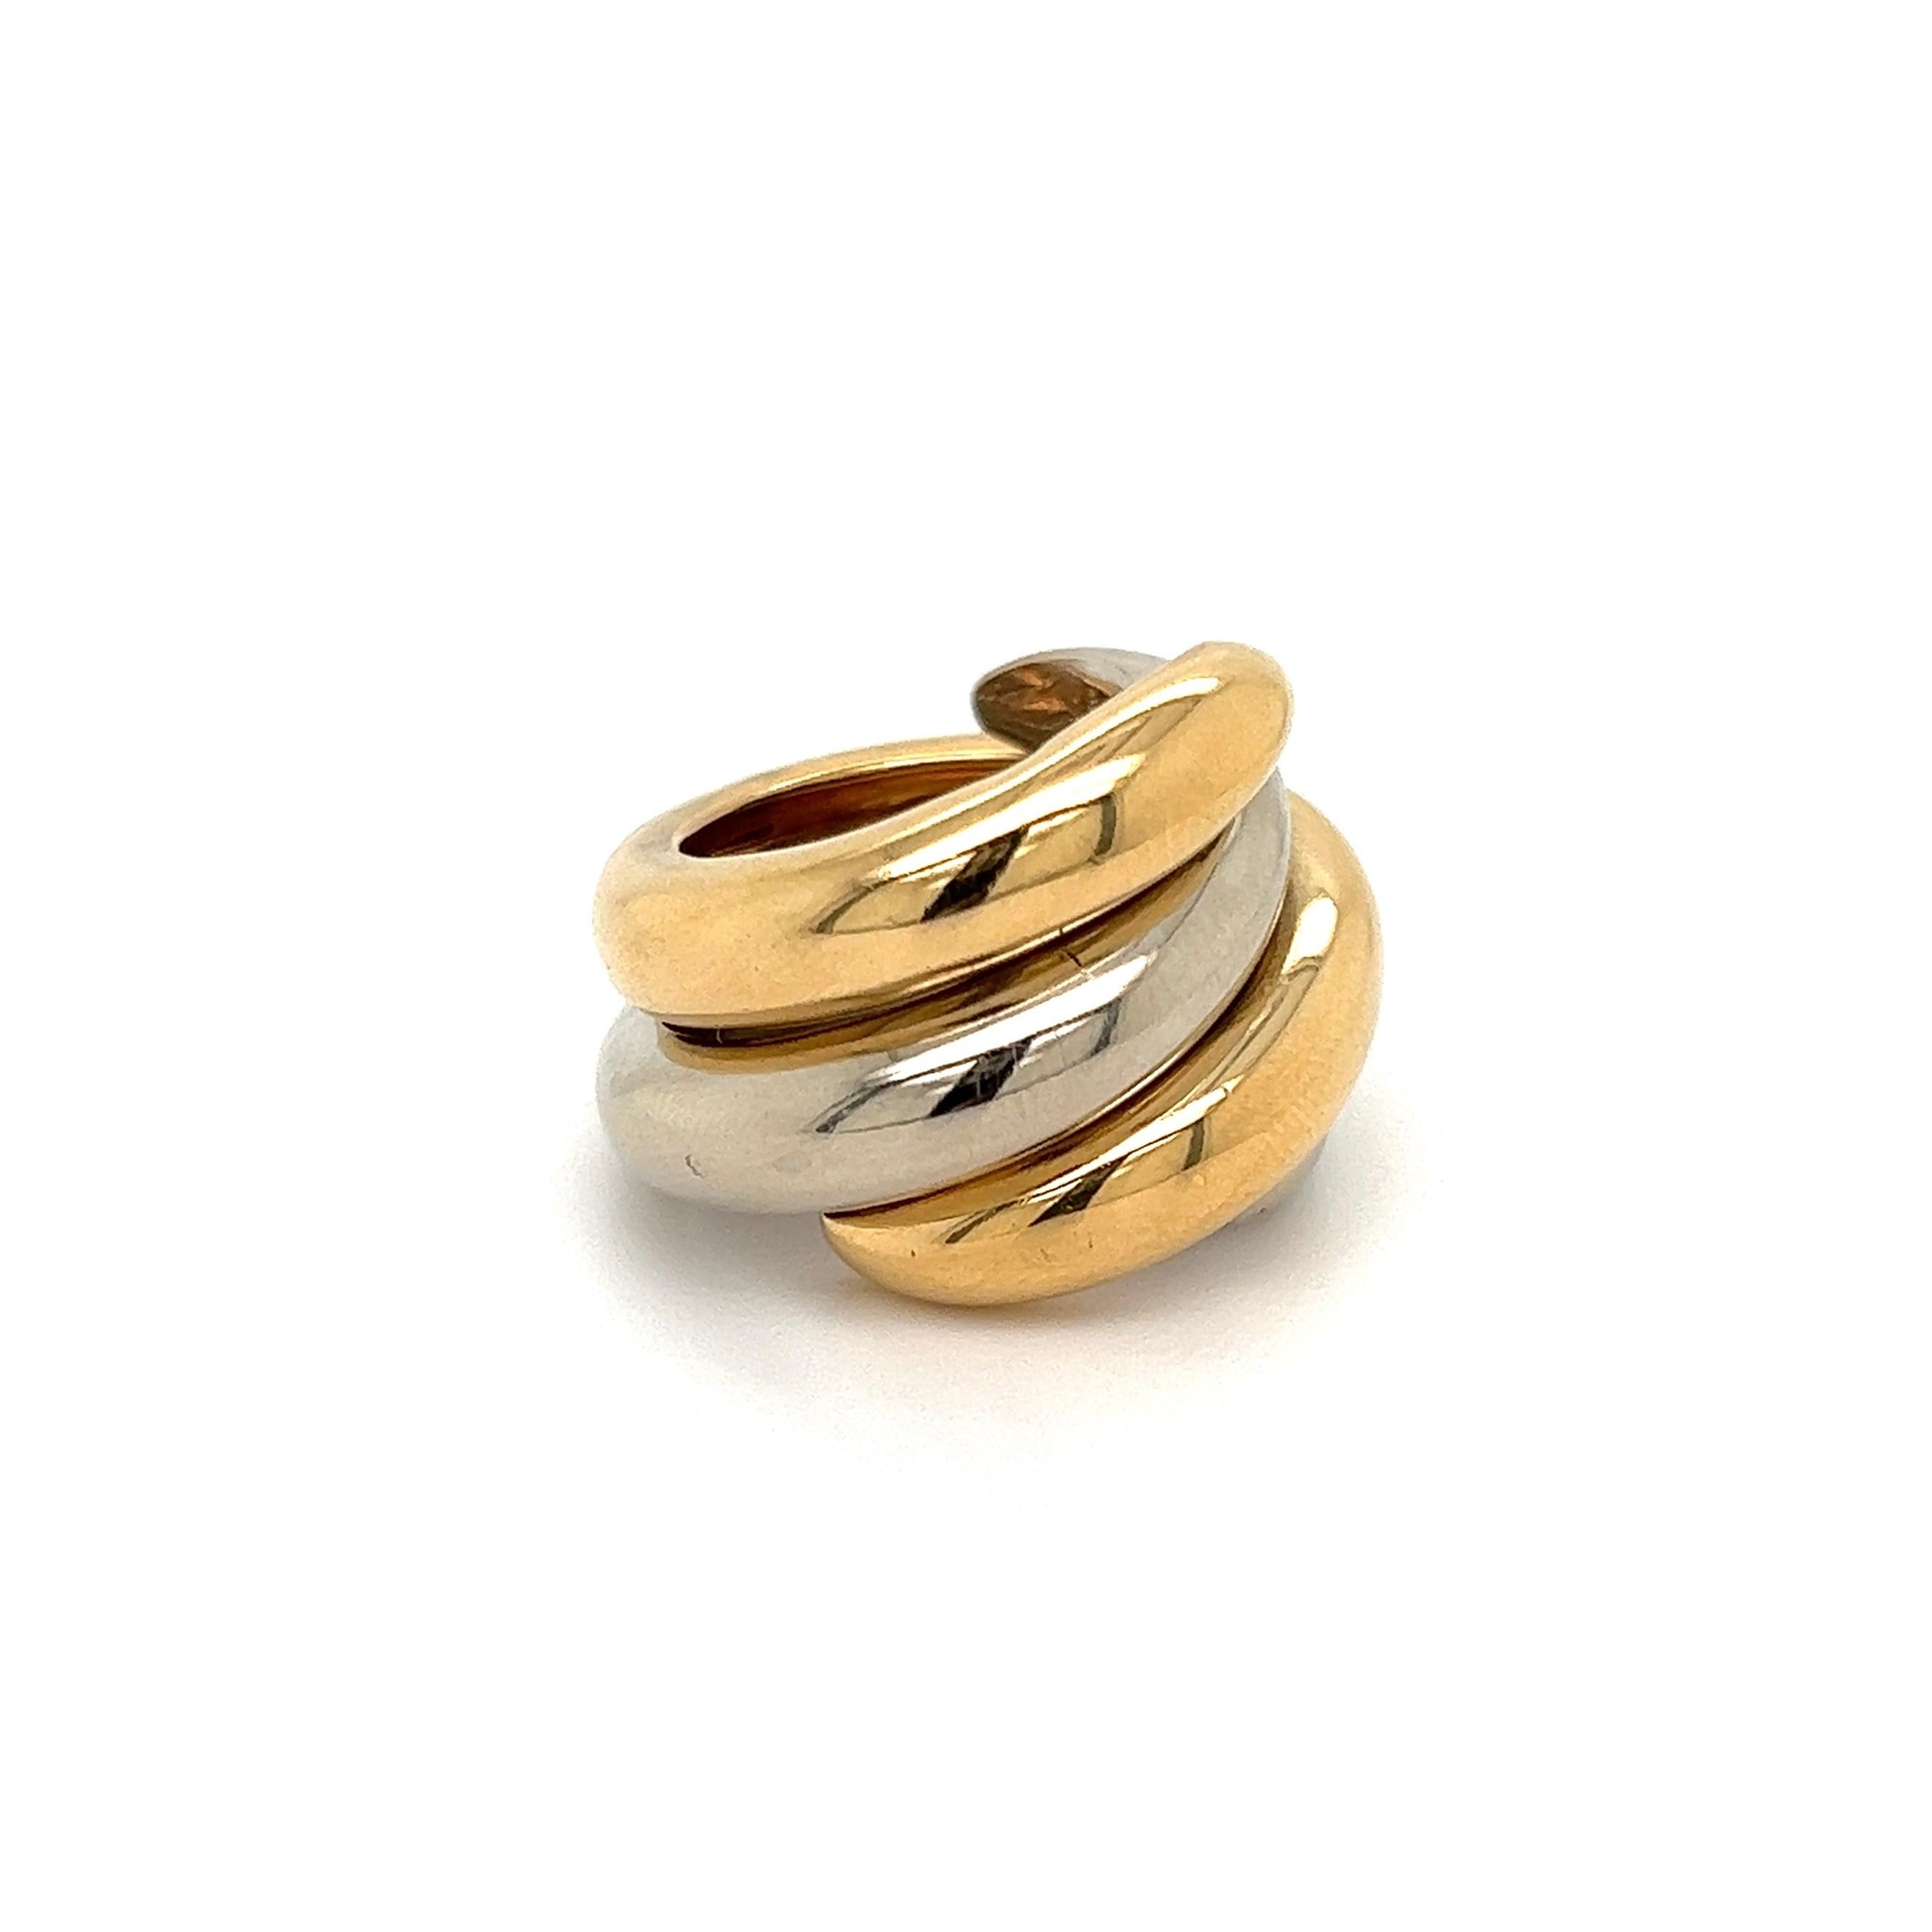 Simply Beautiful! Chaumet France Designer 18K 2-Tone Gold Band Ring. One Band Hand crafted in 18K Yellow Gold, the other Band in 18K White Gold. Measuring approx. 0.92” l x 0.91” w x 0.76” h. Ring size 5.5, we offer ring resizing. Circa 1960s. More